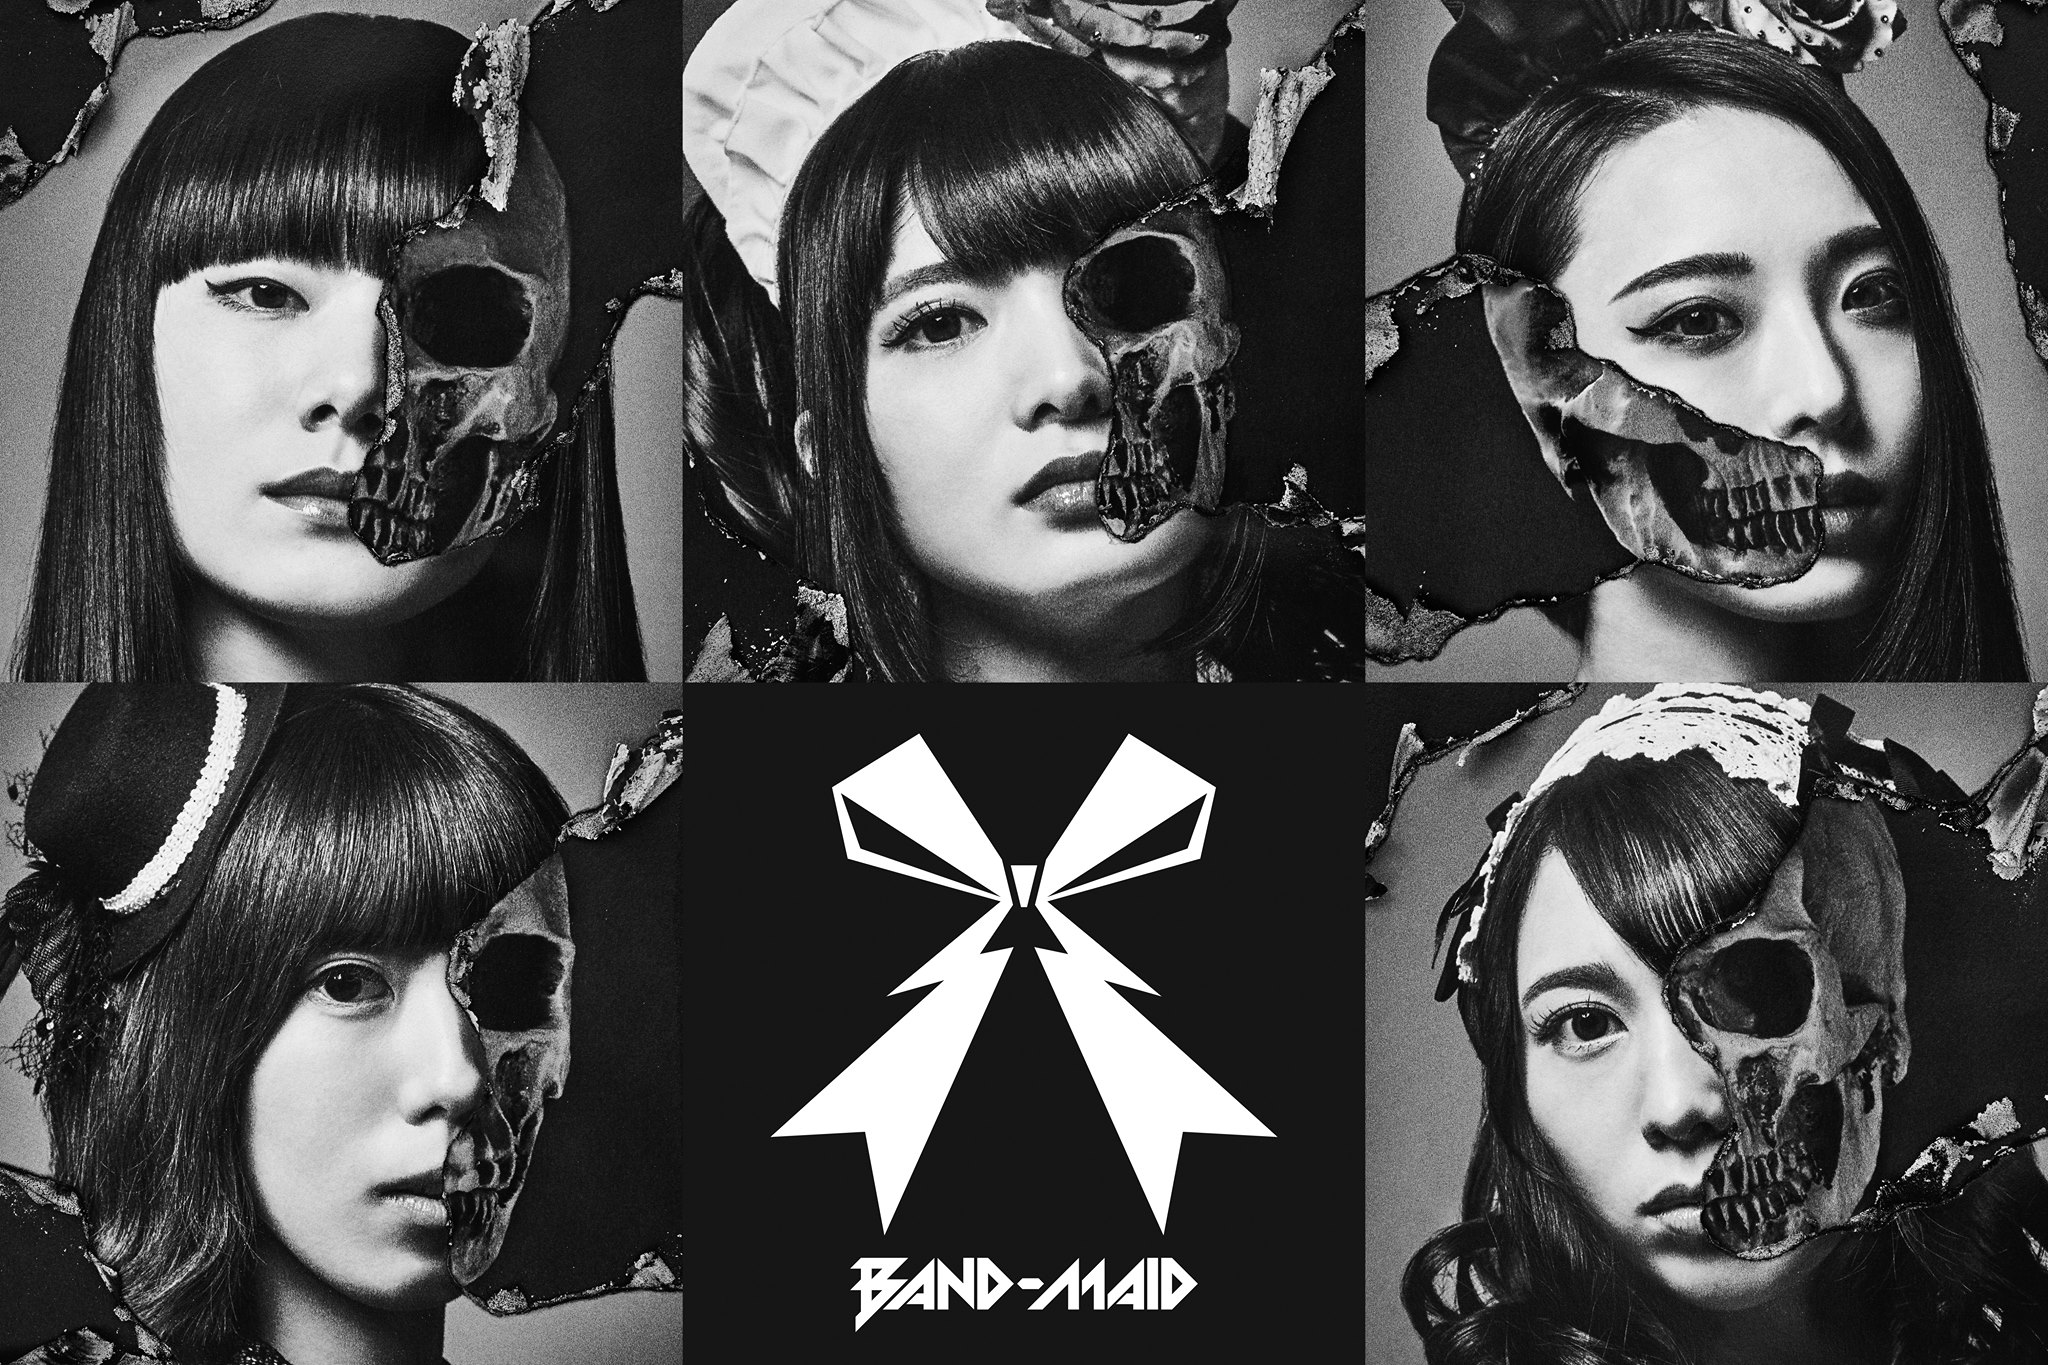 BAND-MAID to re-release first album Maid in Japan – J-Generation